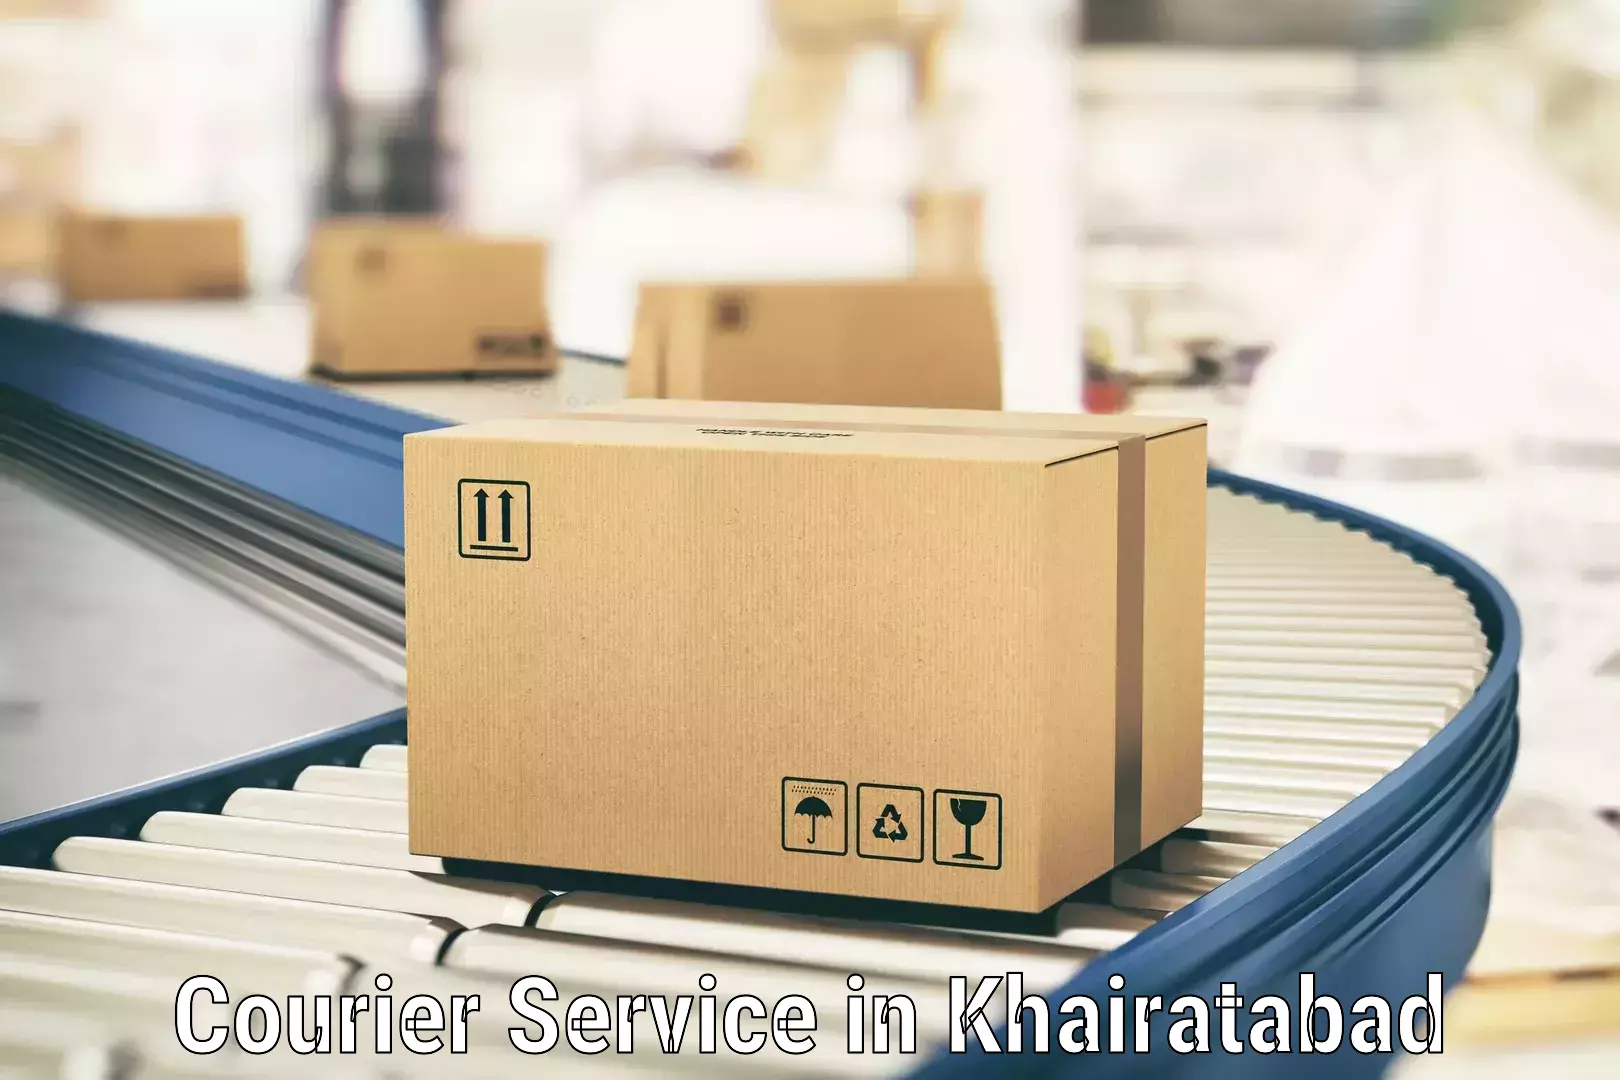 Affordable shipping rates in Khairatabad